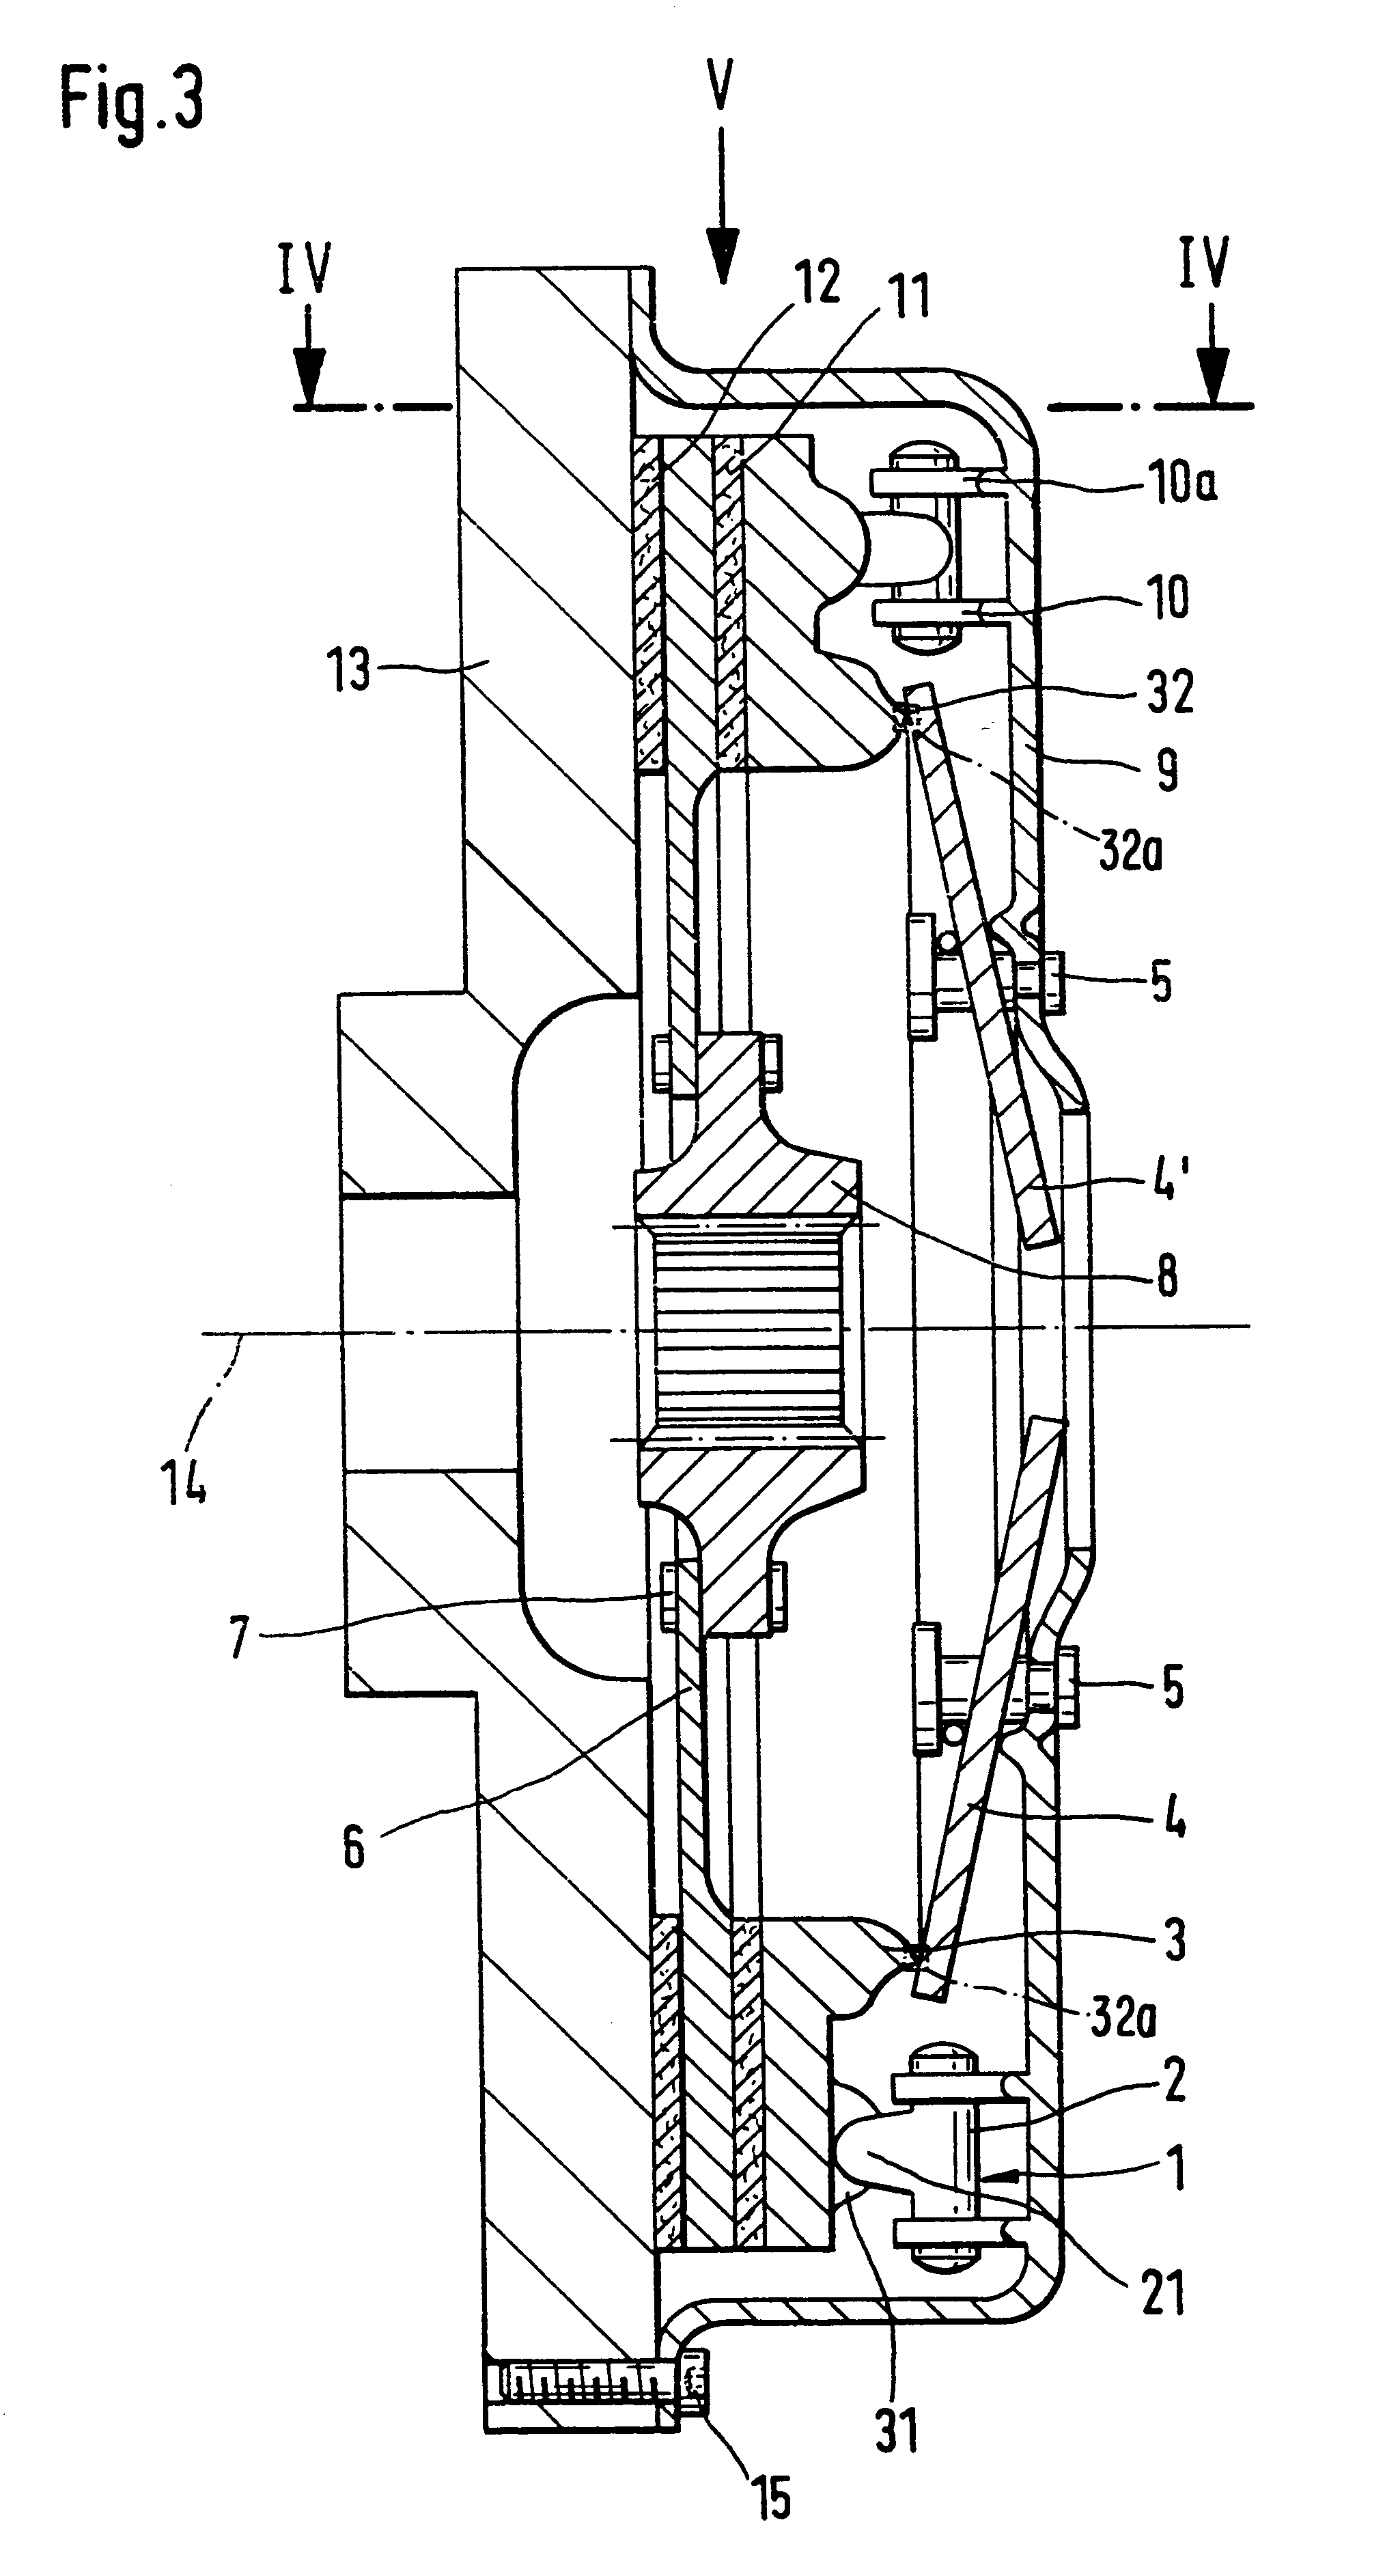 Self-reinforcing friction clutch